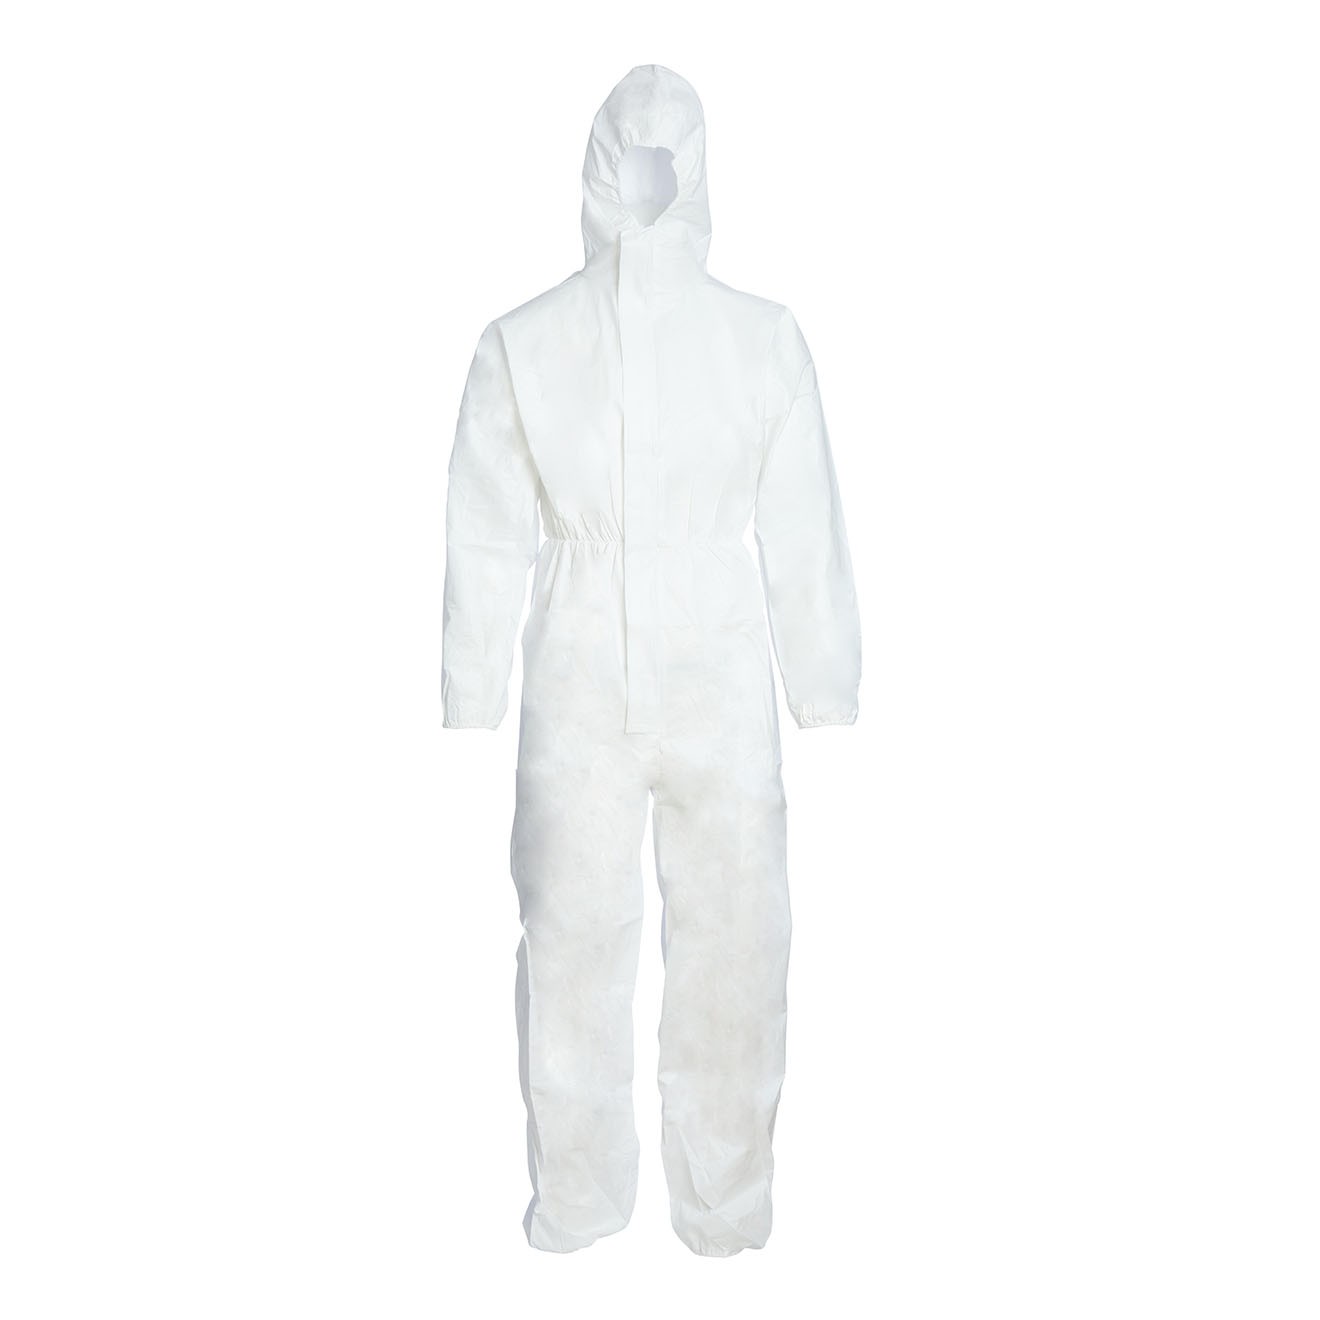 Premium Category Type 5/6 Disposable Coverall